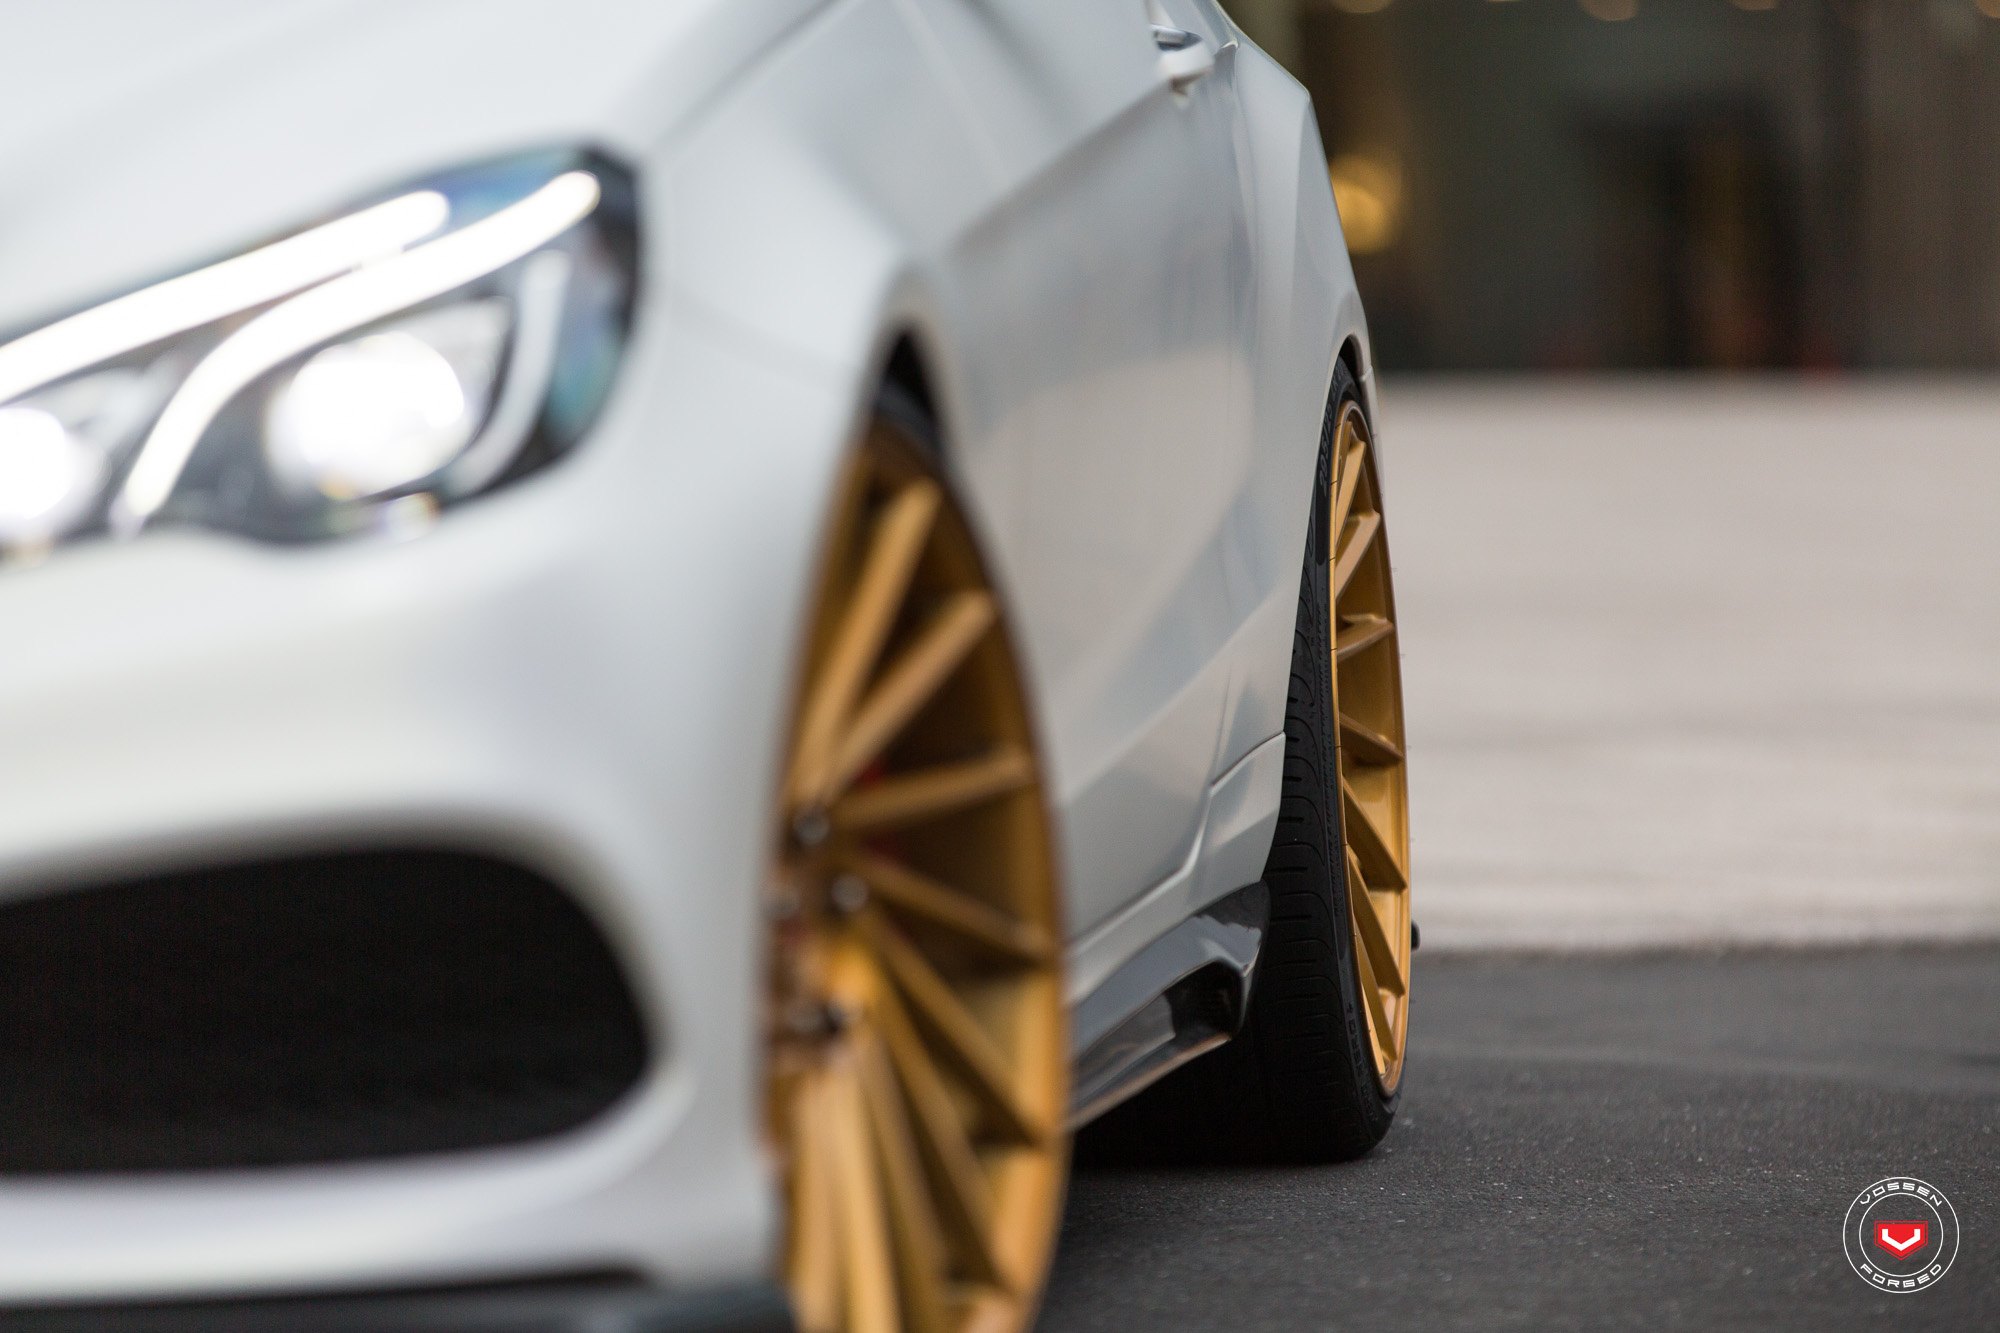 Gold Forged Vossen Rims on White Mercedes E-Class - Photo by Vossen